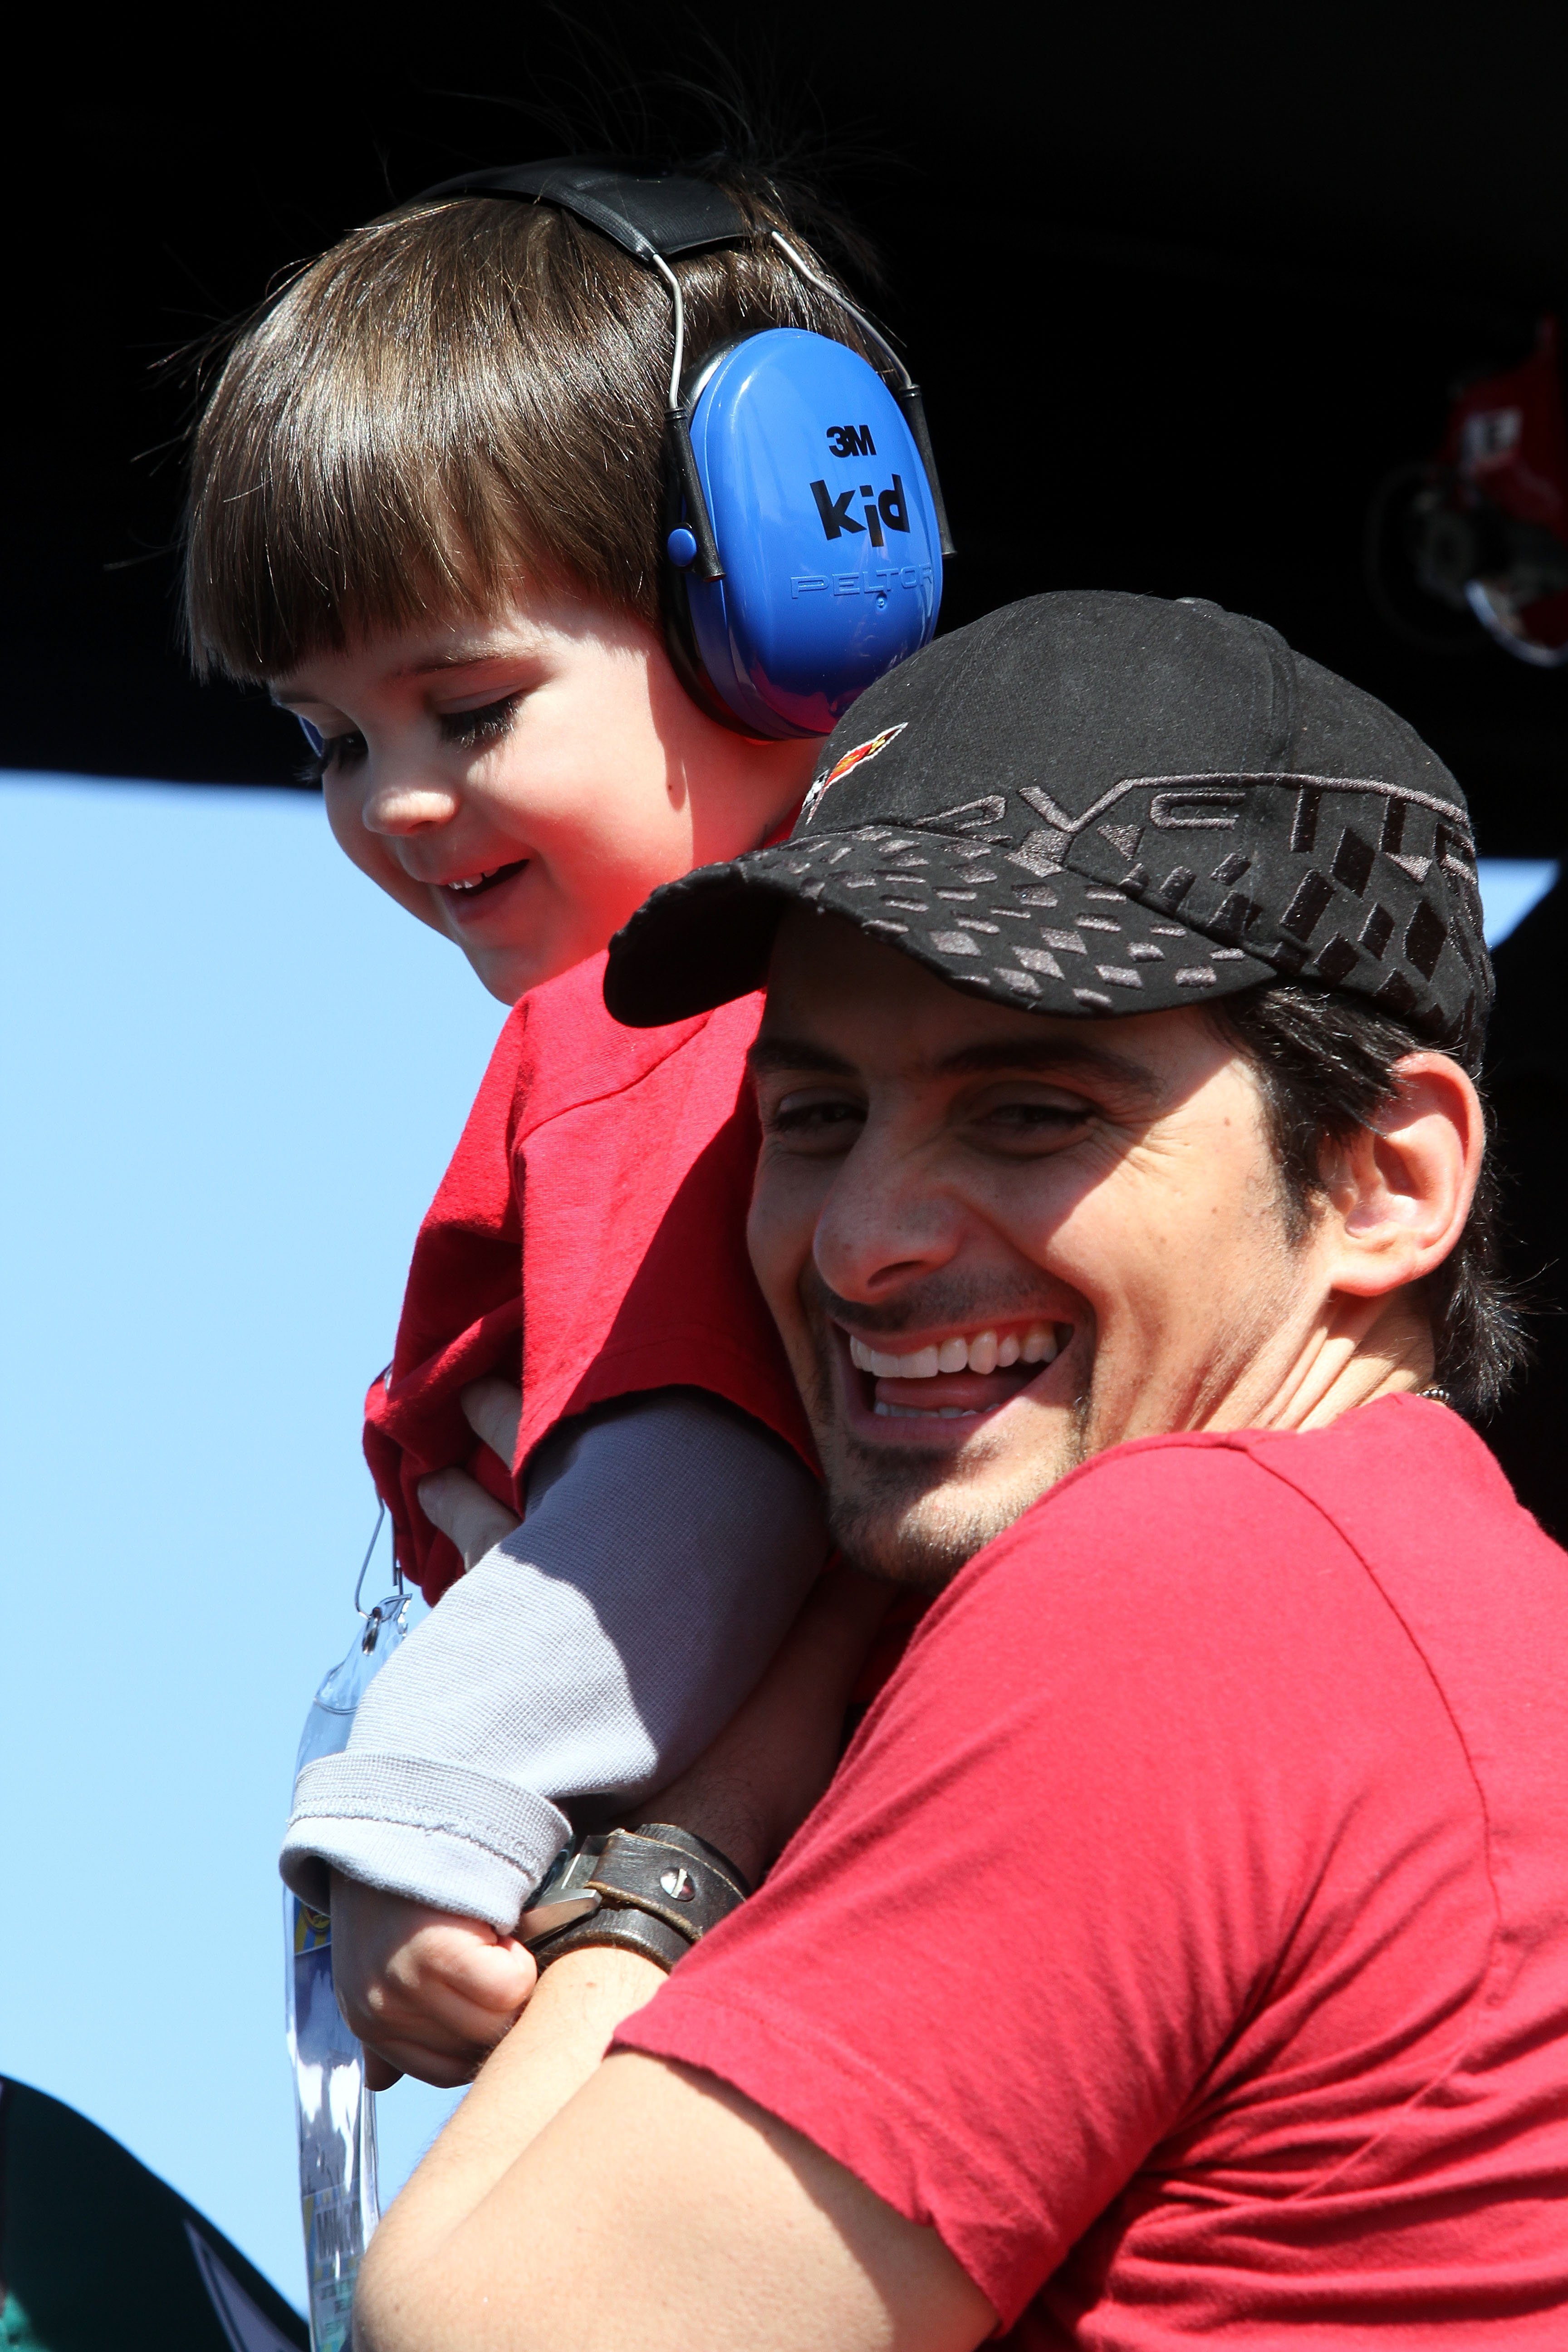  Brad Paisley looks on with his son William Huckleberry during the NASCAR Sprint Cup Series at Daytona International Speedway on February 20, 2011 in Daytona Beach, Florida | Source: Getty Images